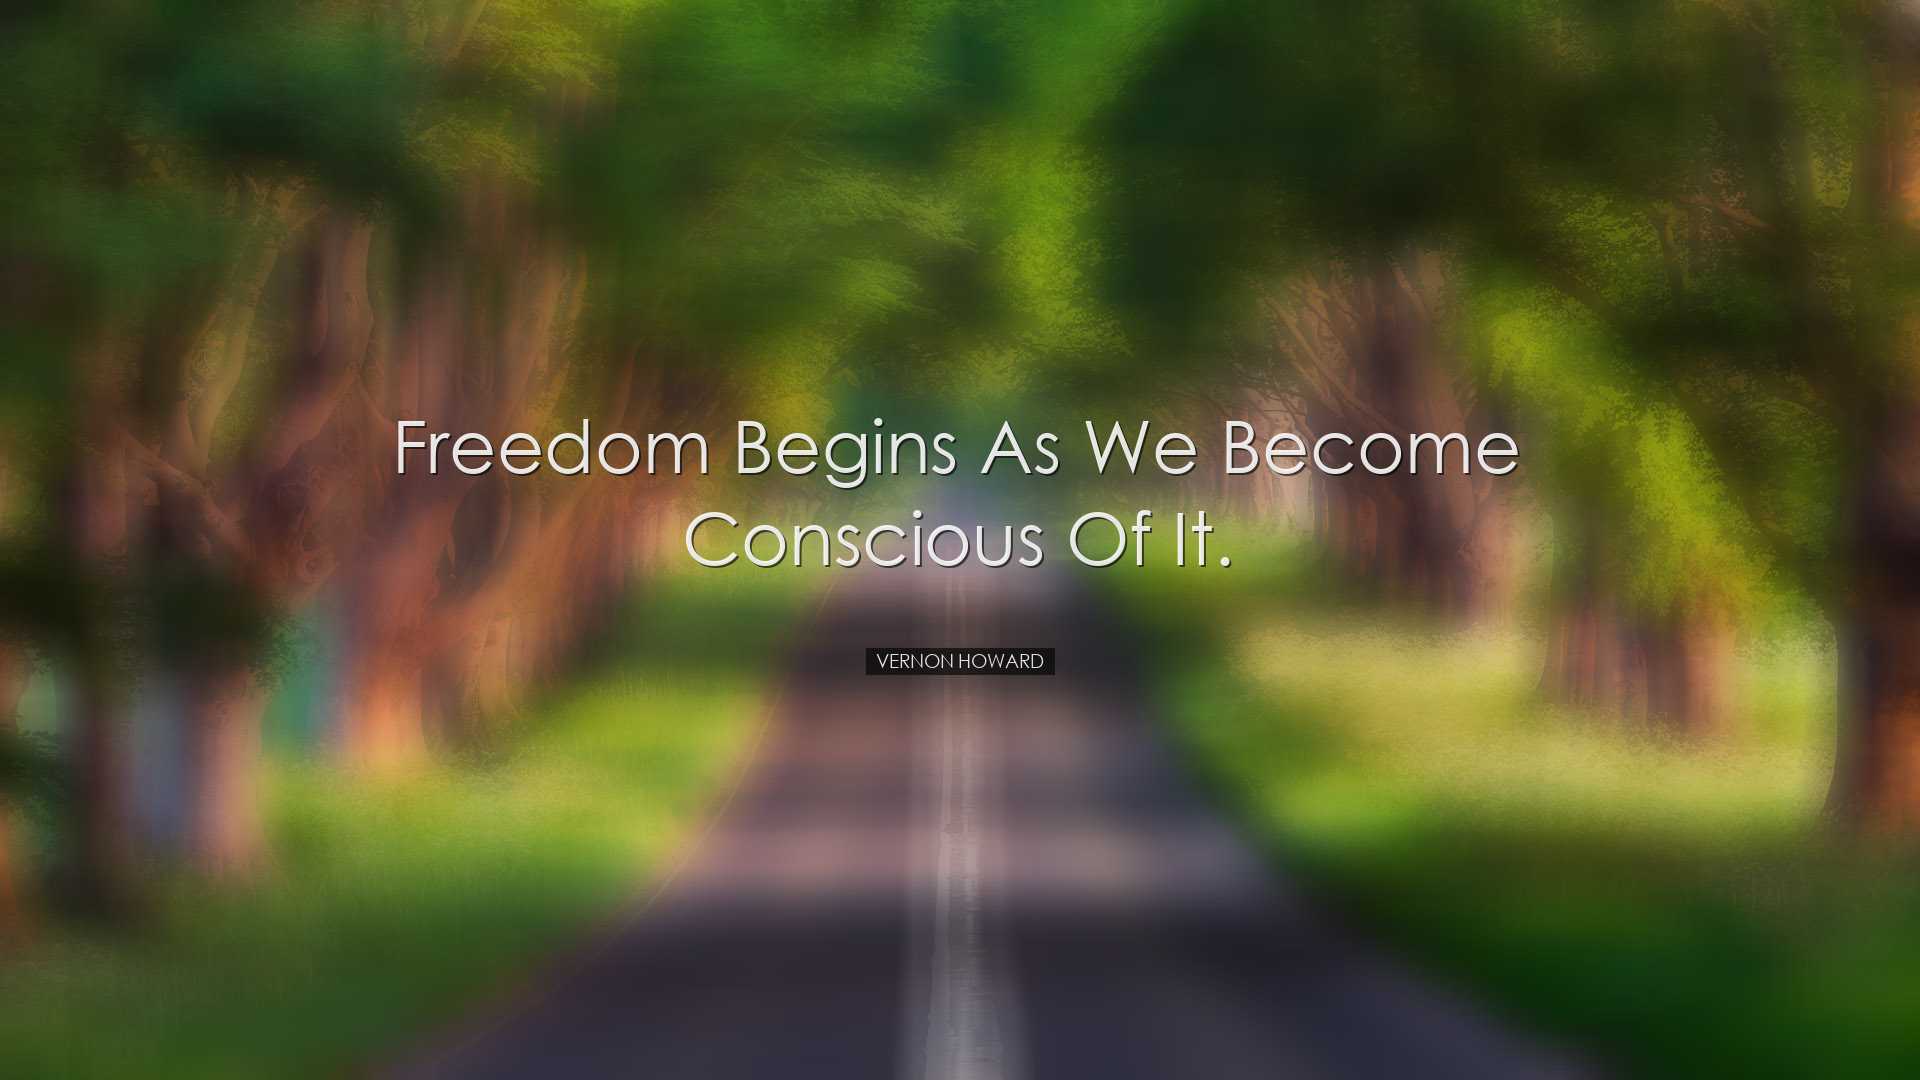 Freedom begins as we become conscious of it. - Vernon Howard